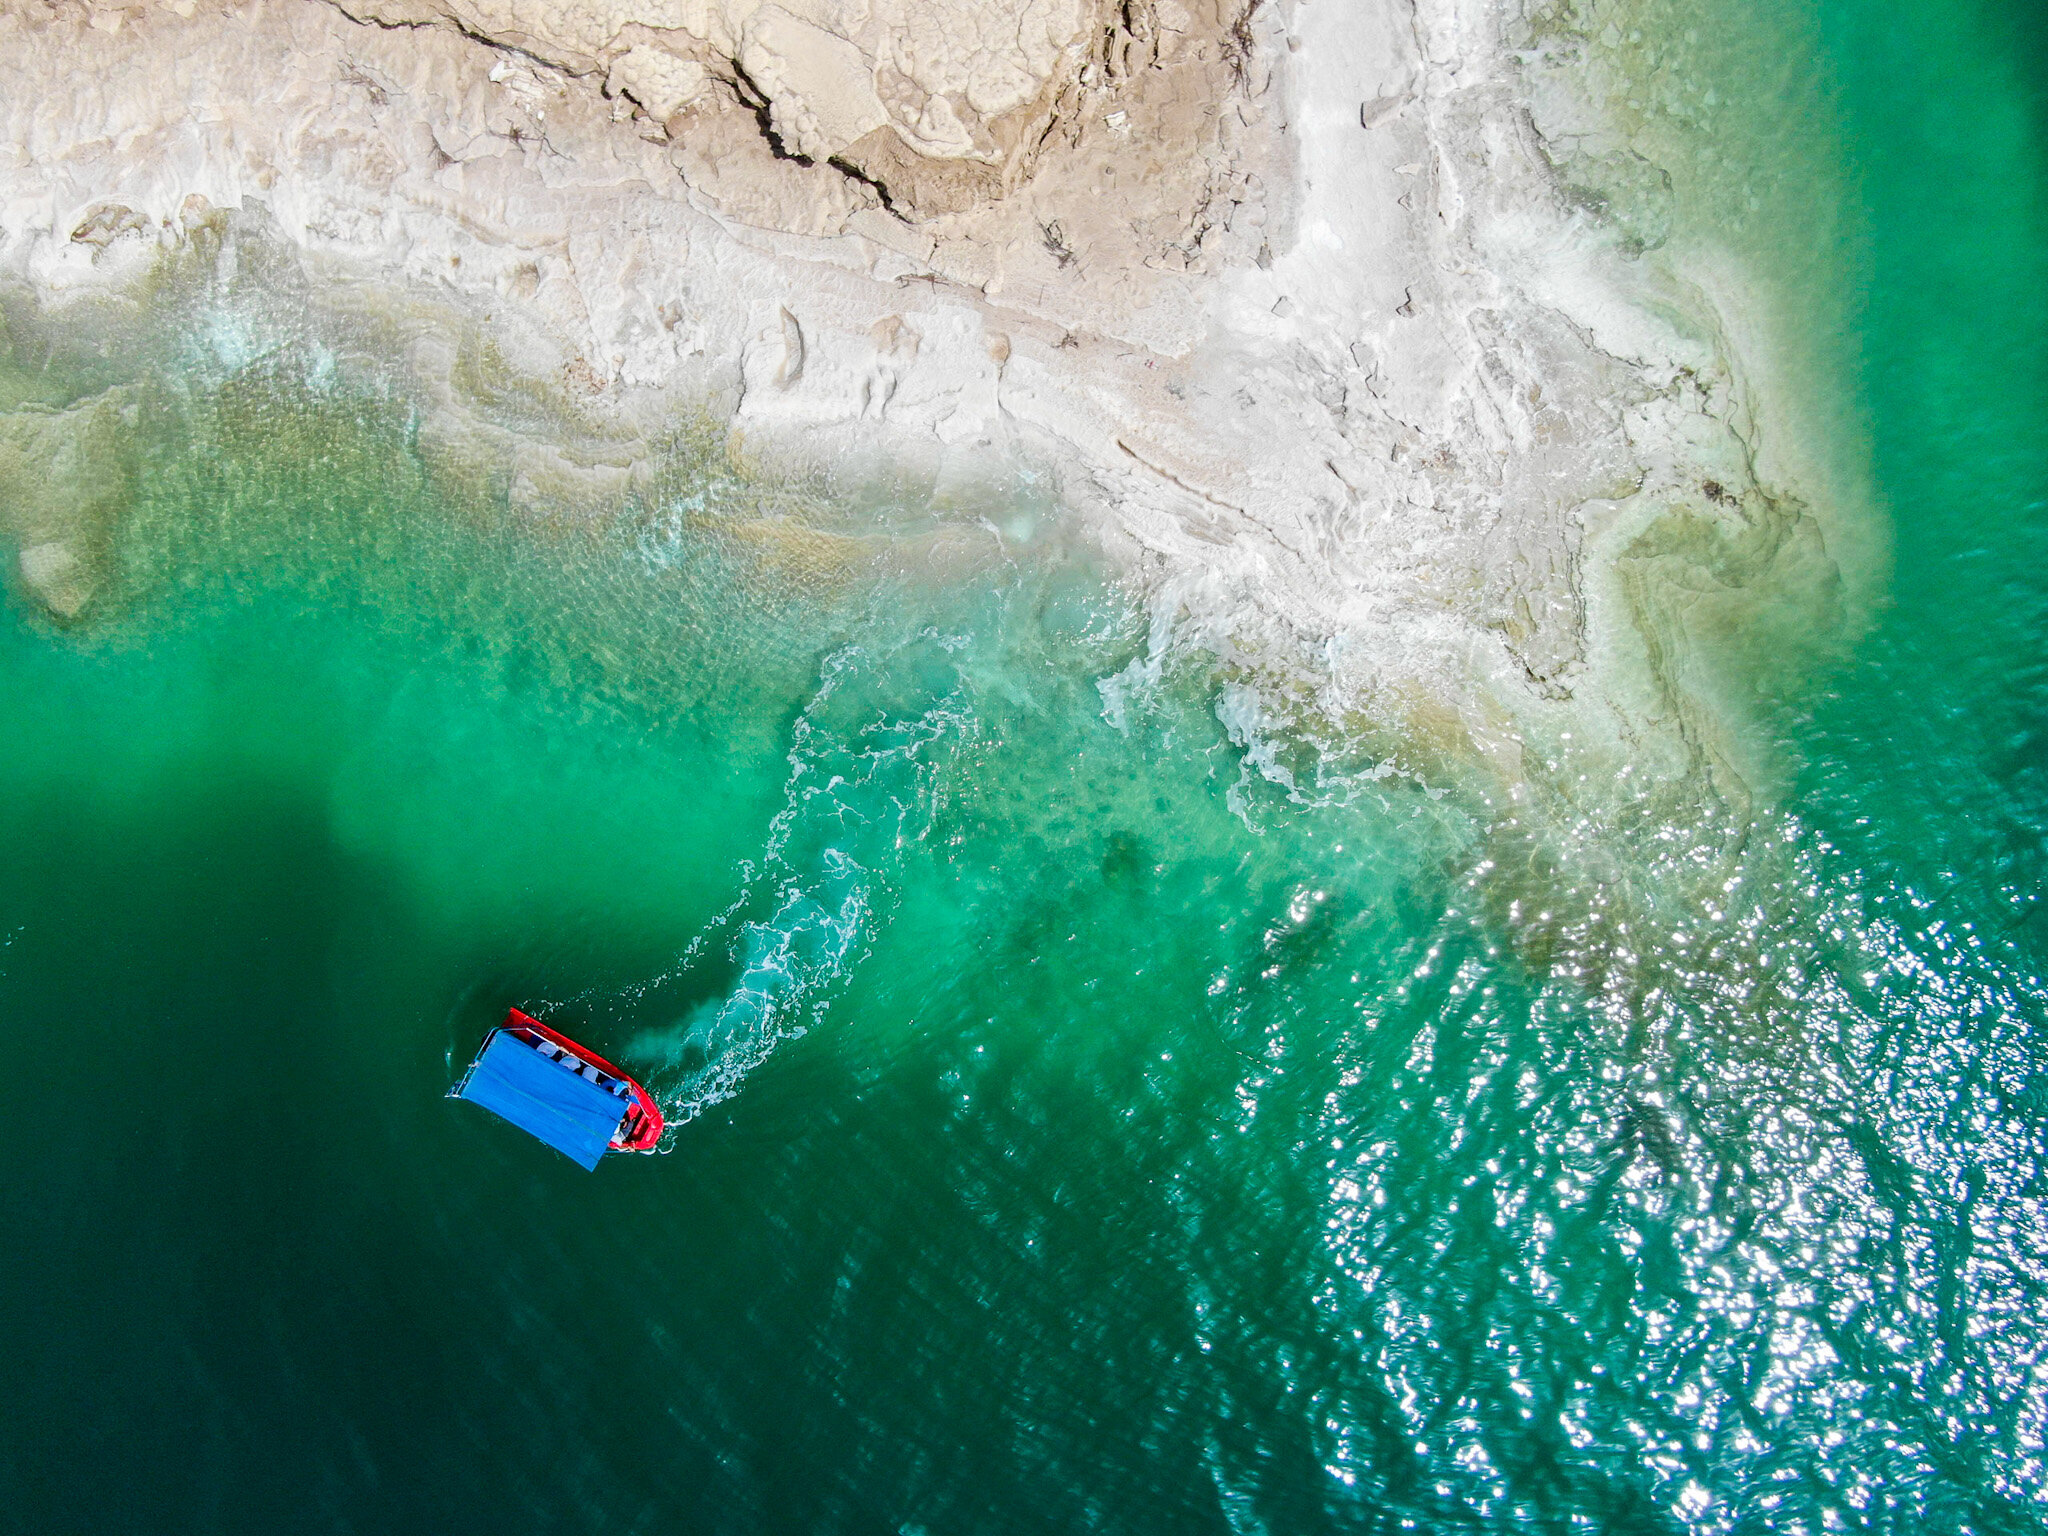 Dead Sea cruise is a one-of-a-kind experience! ✨
No boats can be left in the saline water due to corrosion, so they are taken out every day and washed with fresh water. 🌊
The Dead Sea is truly a wonder. At 1,412 feet below sea level, it's the lowest